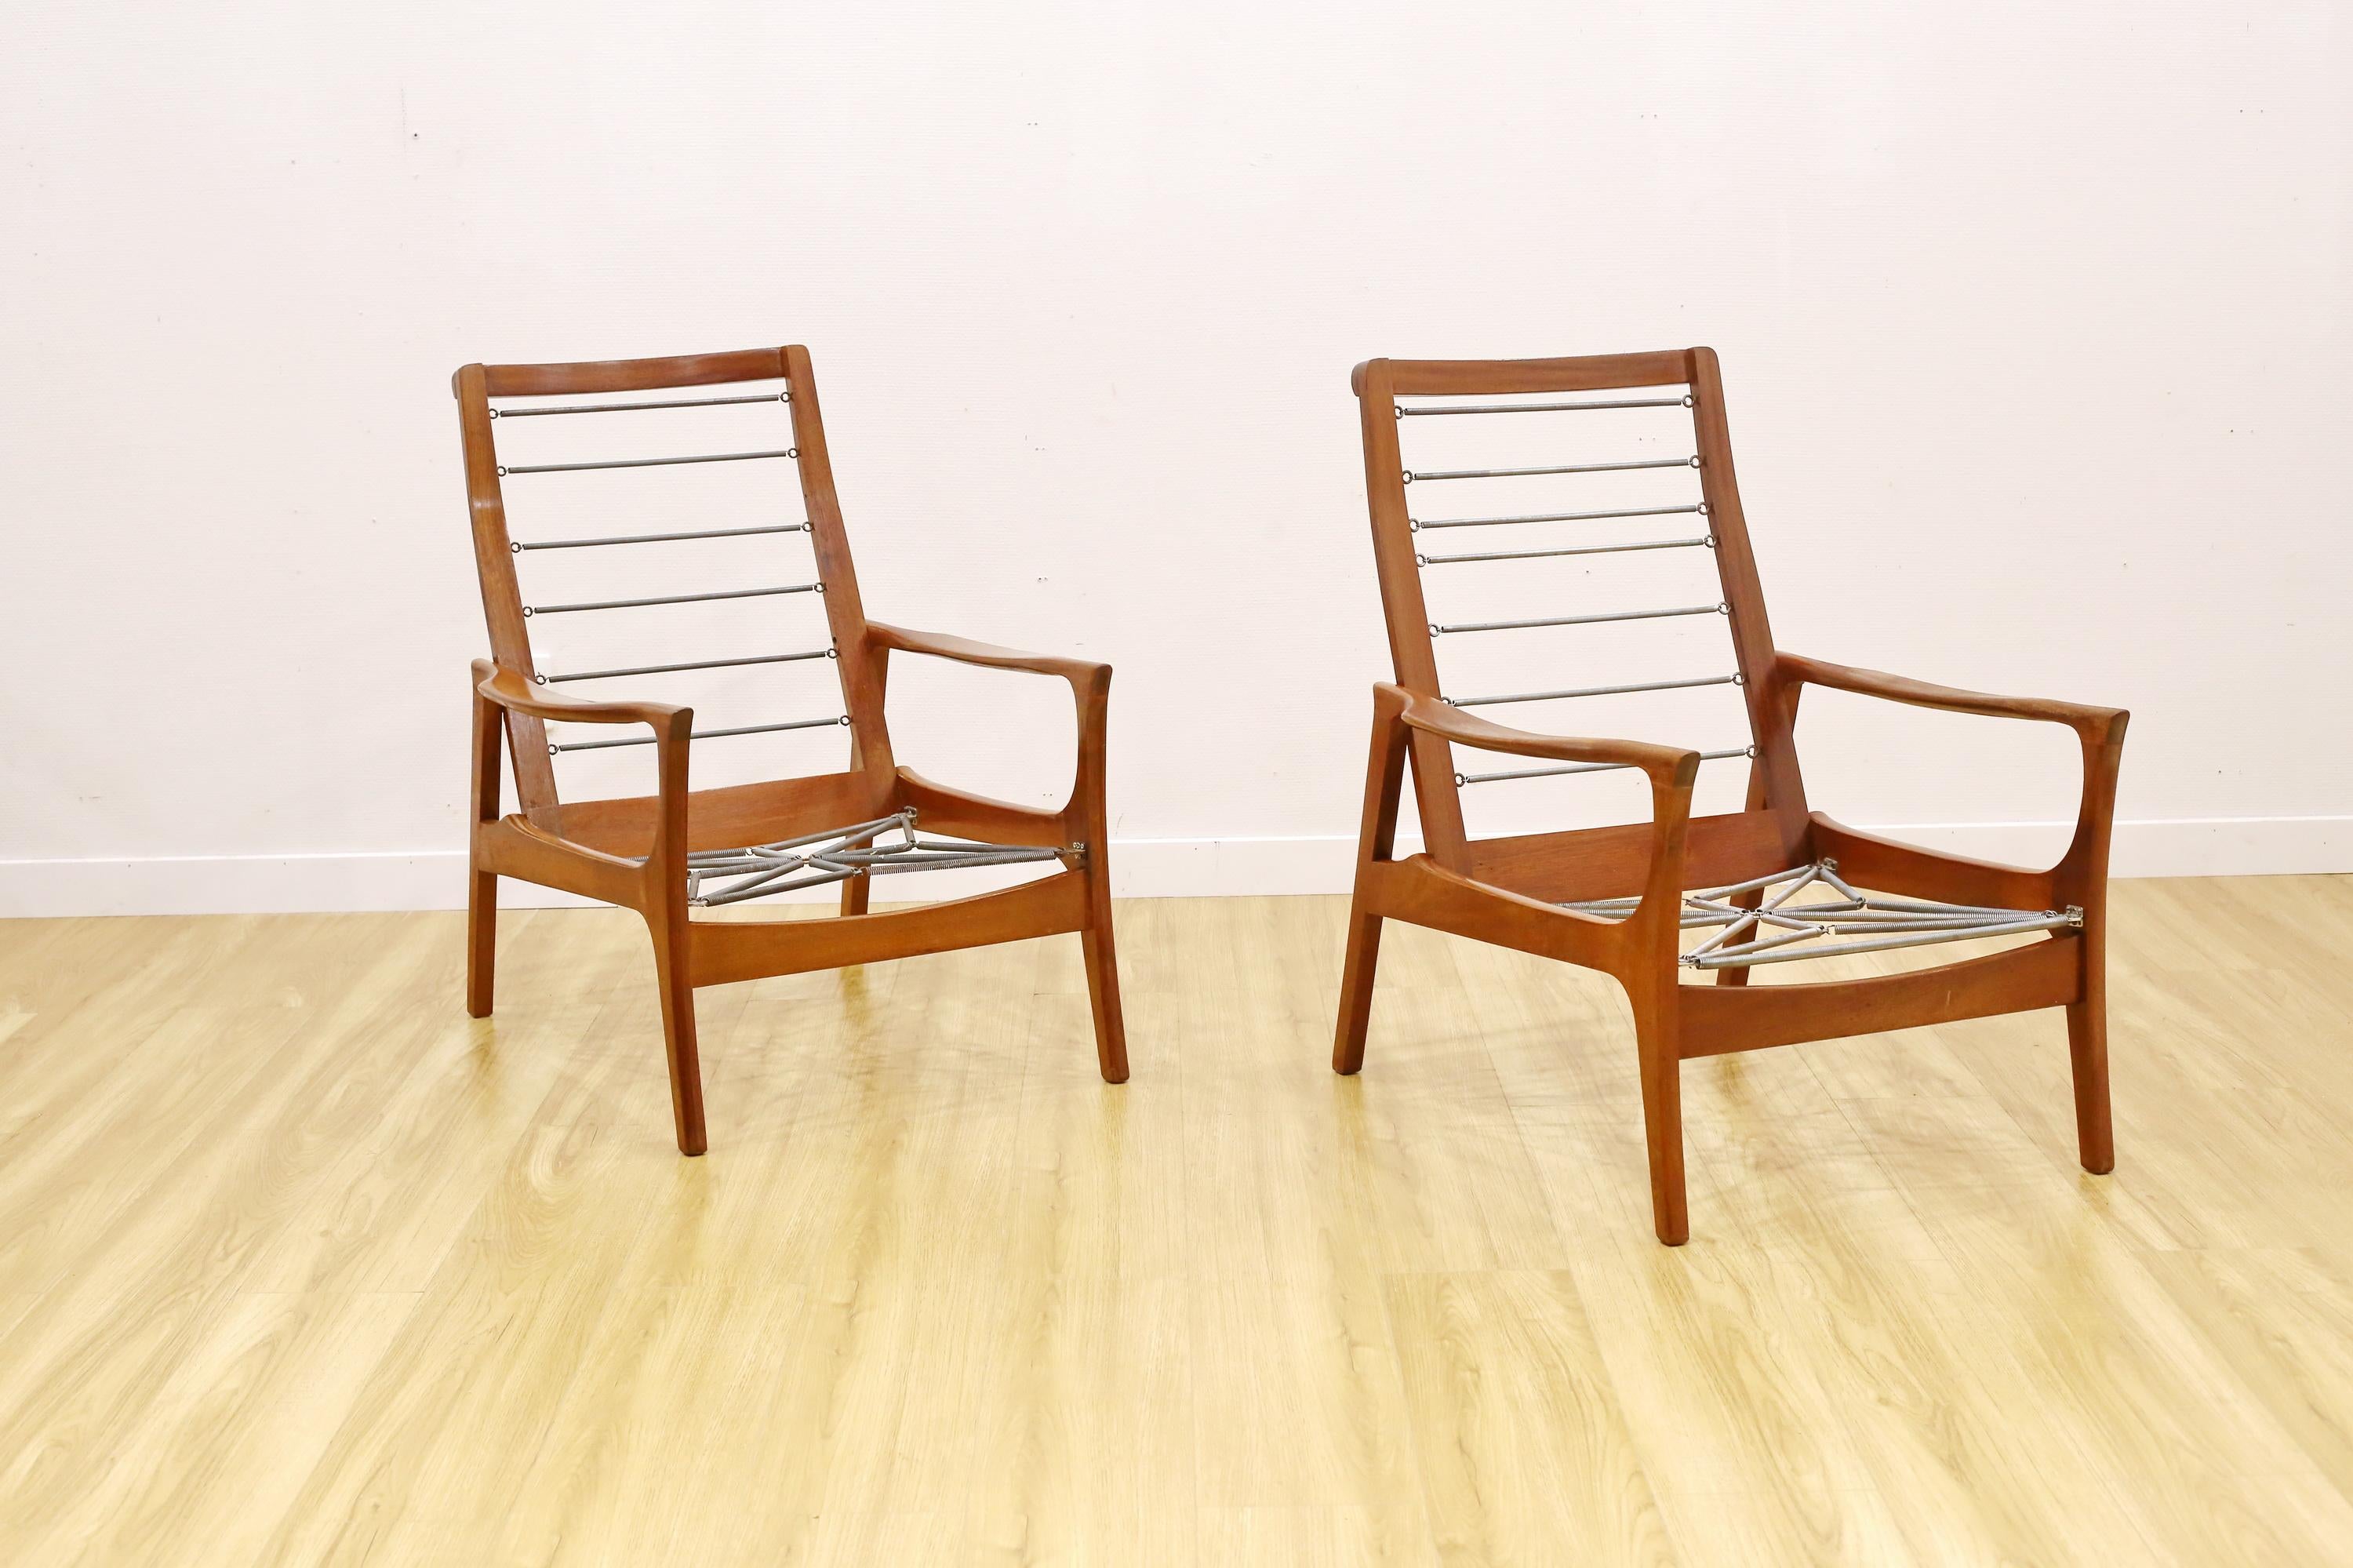 A Pair Don 'CONCORD' armchairs in good condtion.

Newly wrapped high density foam and new zippable fabric cover.

Strong frames, no wobbly, beautiful wood grains.

Small scratches/dents/imperfection due to age. 

70W * 82D * 94H
seat high 42cm
seat